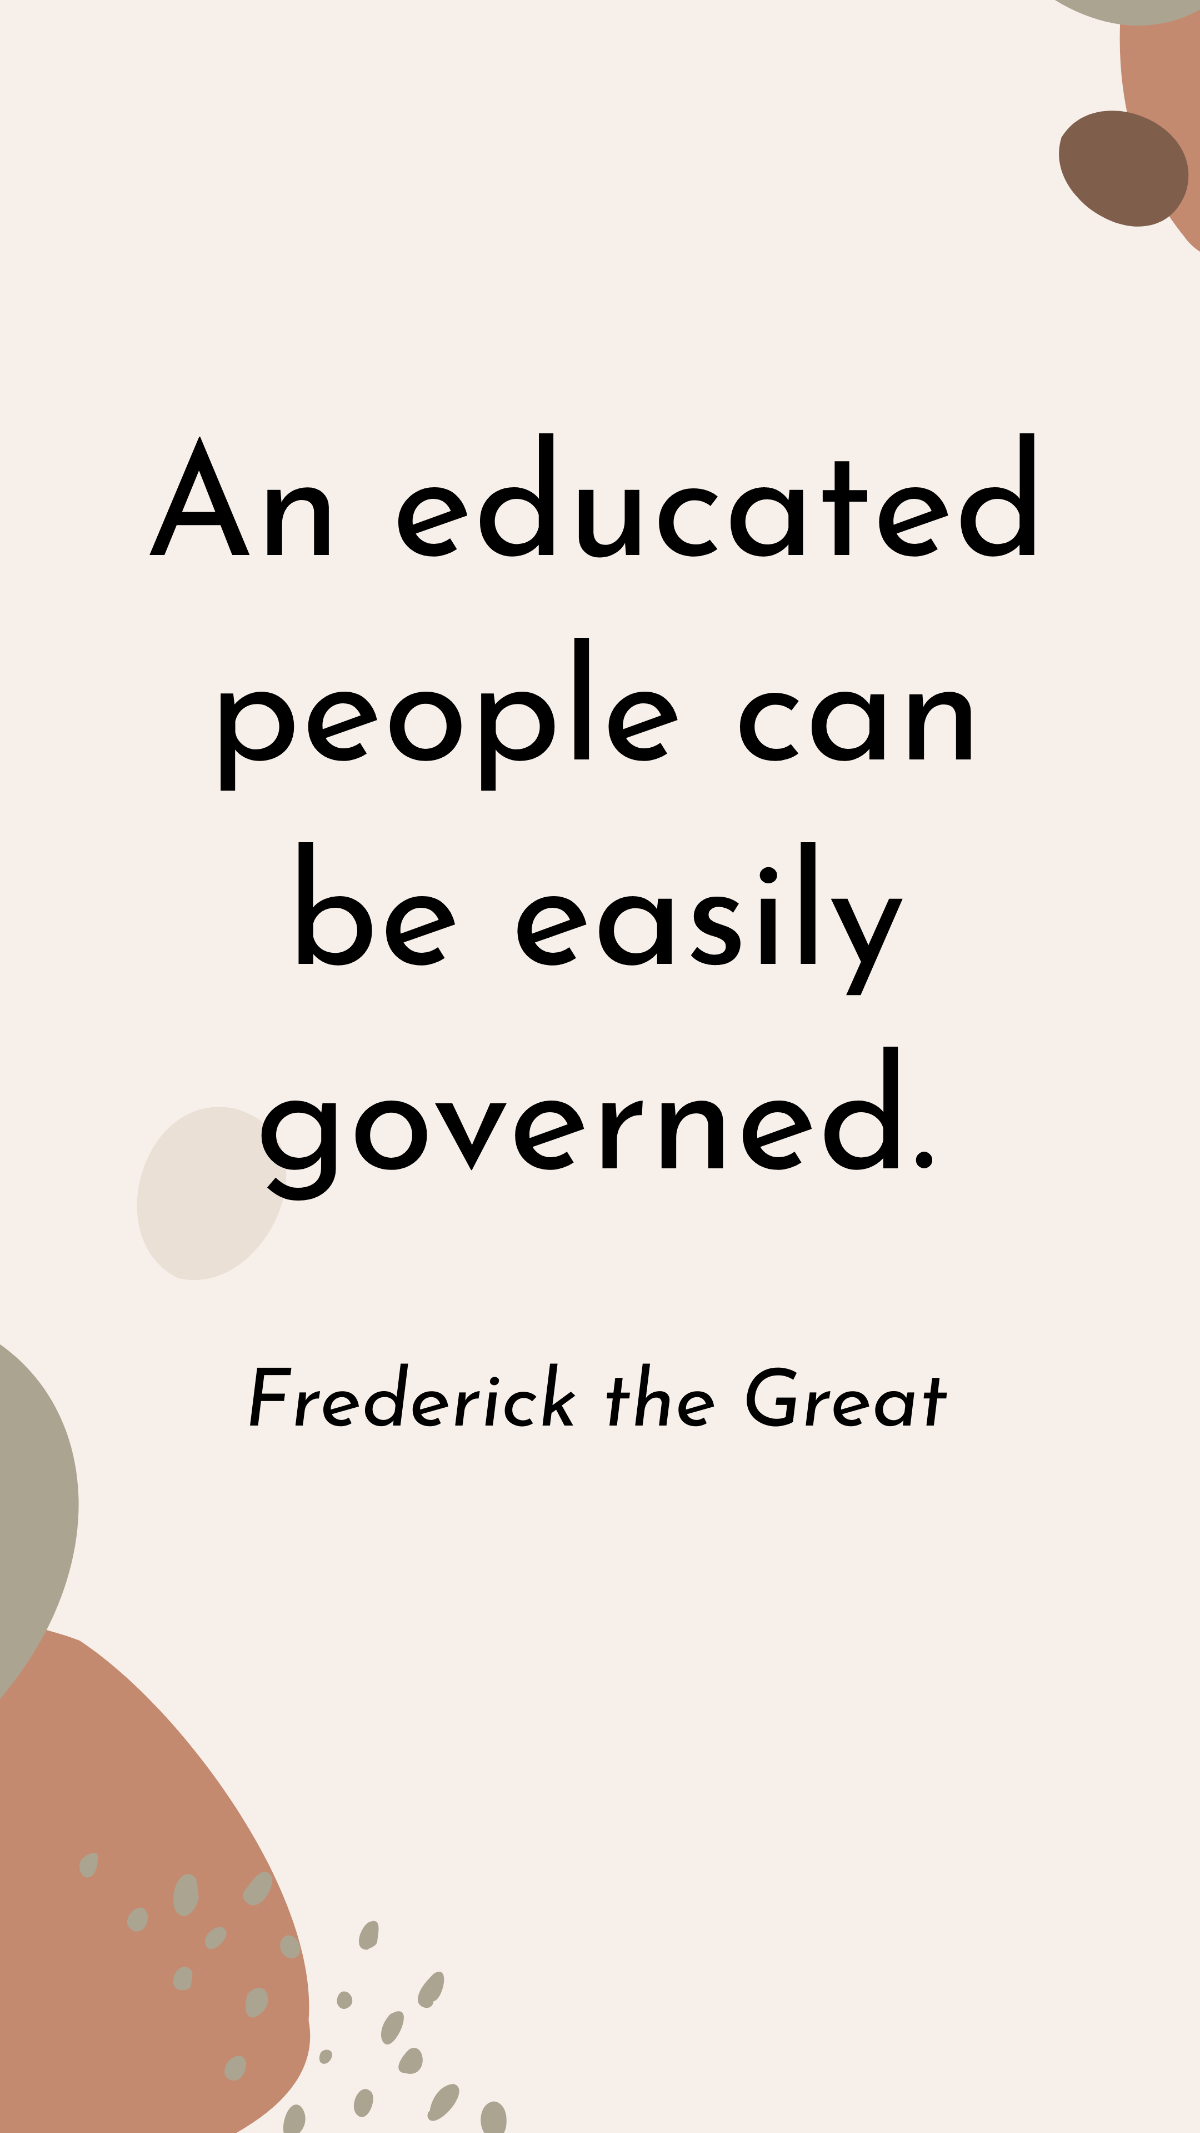 Frederick the Great - An educated people can be easily governed.